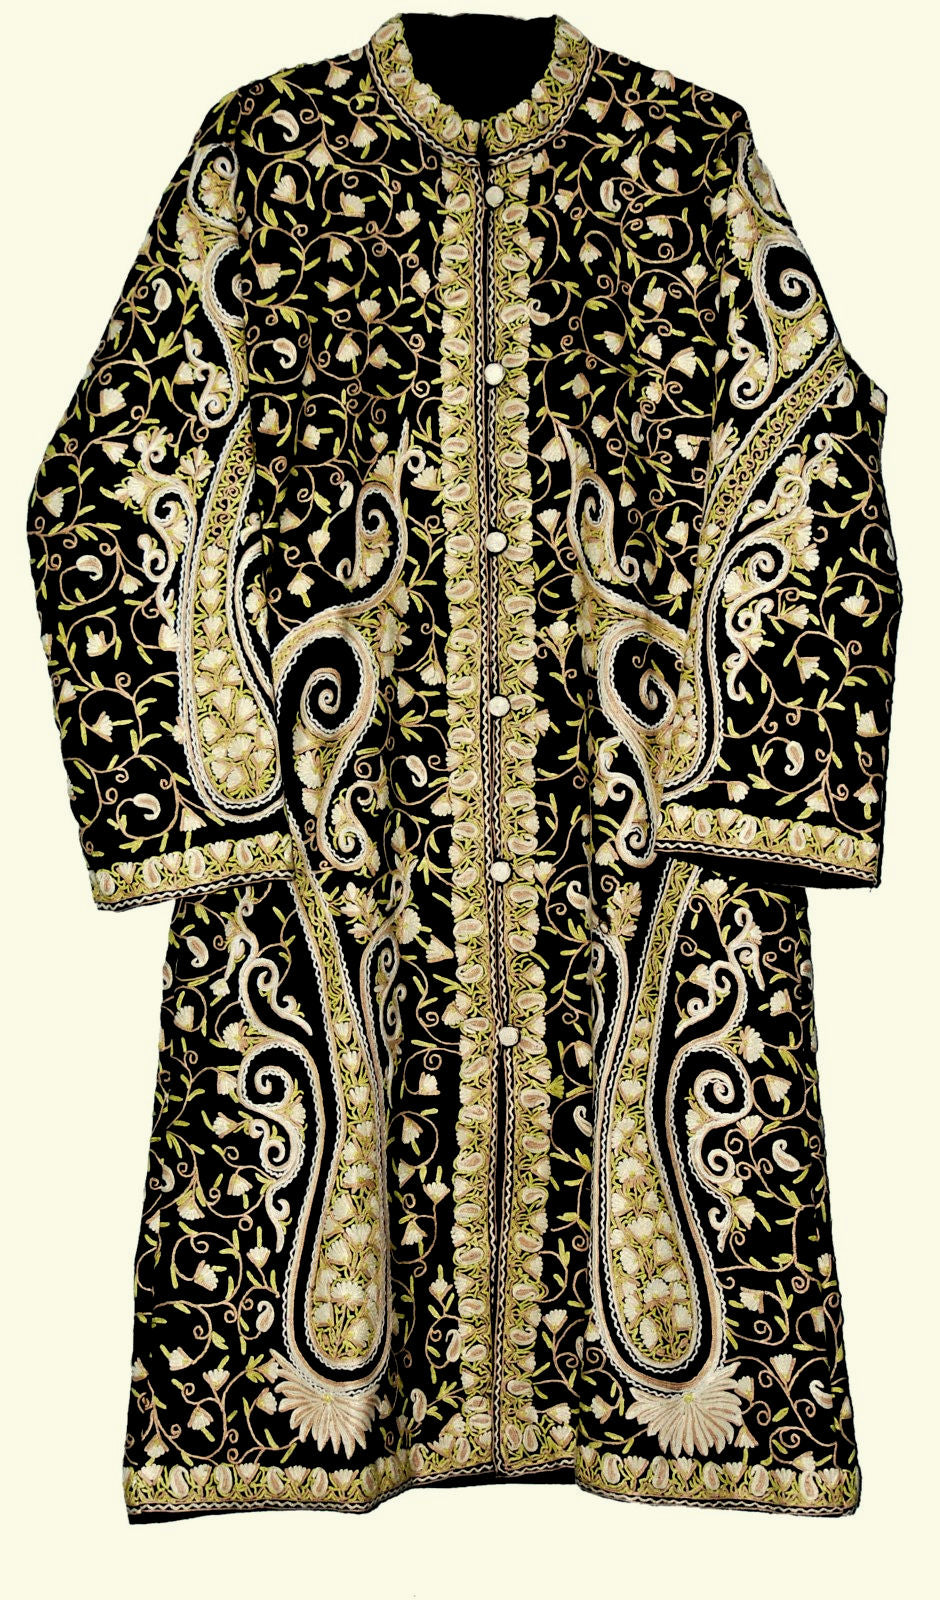 Woolen Coat Long Jacket Black, Cream and White Embroidery #AO-162